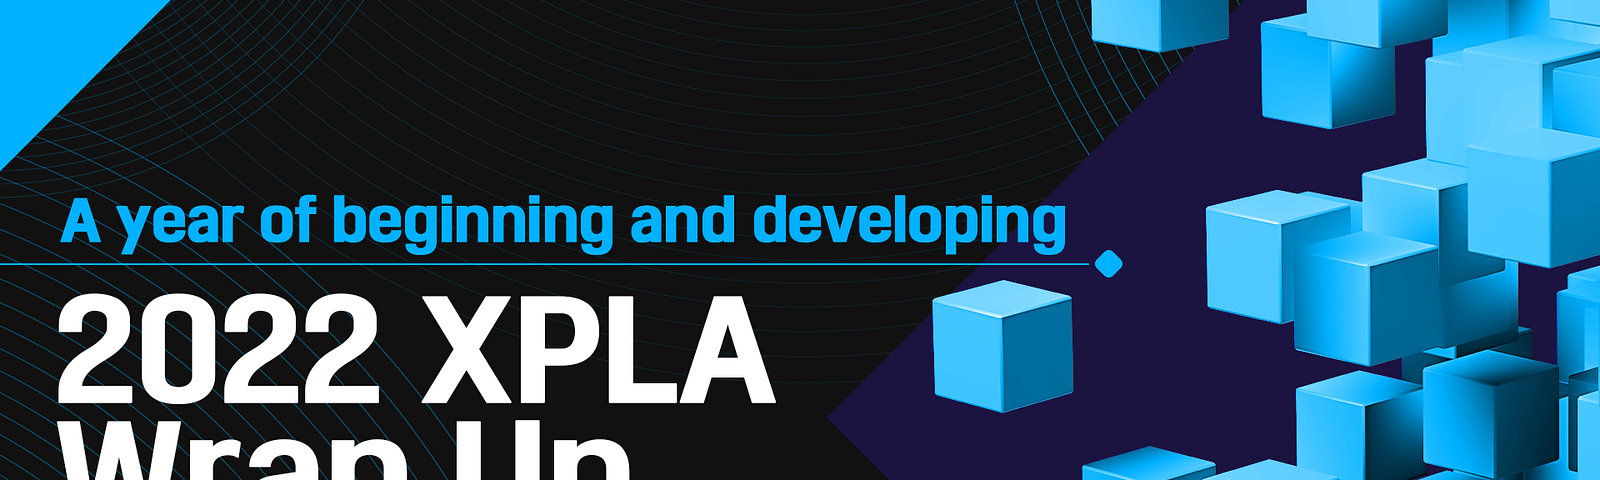 2022 XPLA Wrap Up: A year of beginning and developing!